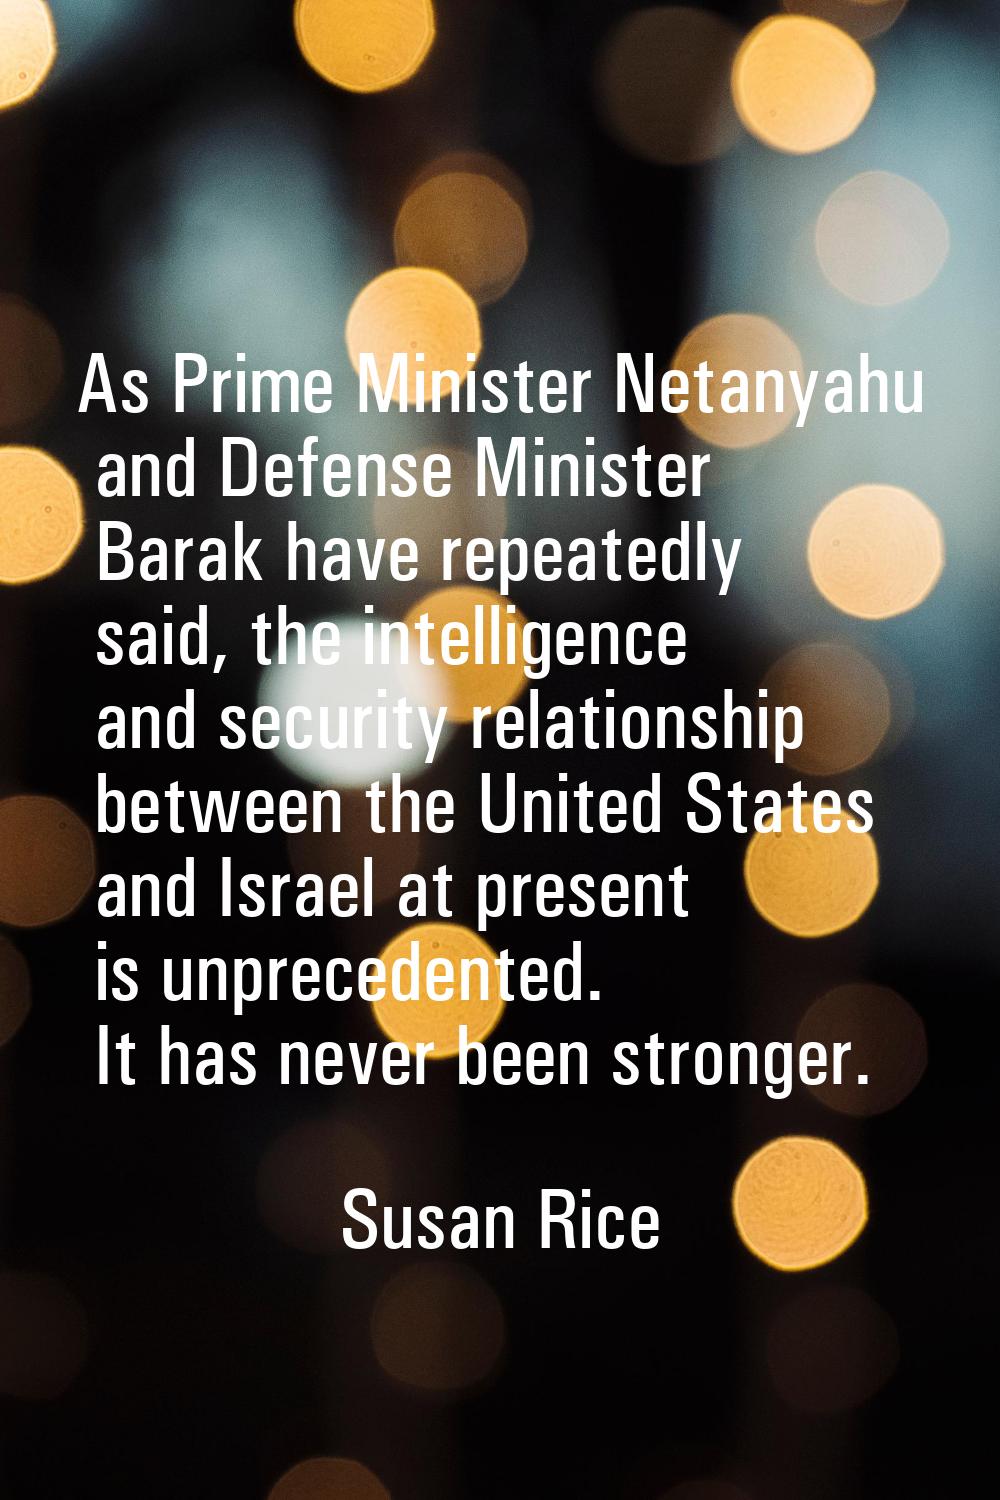 As Prime Minister Netanyahu and Defense Minister Barak have repeatedly said, the intelligence and s